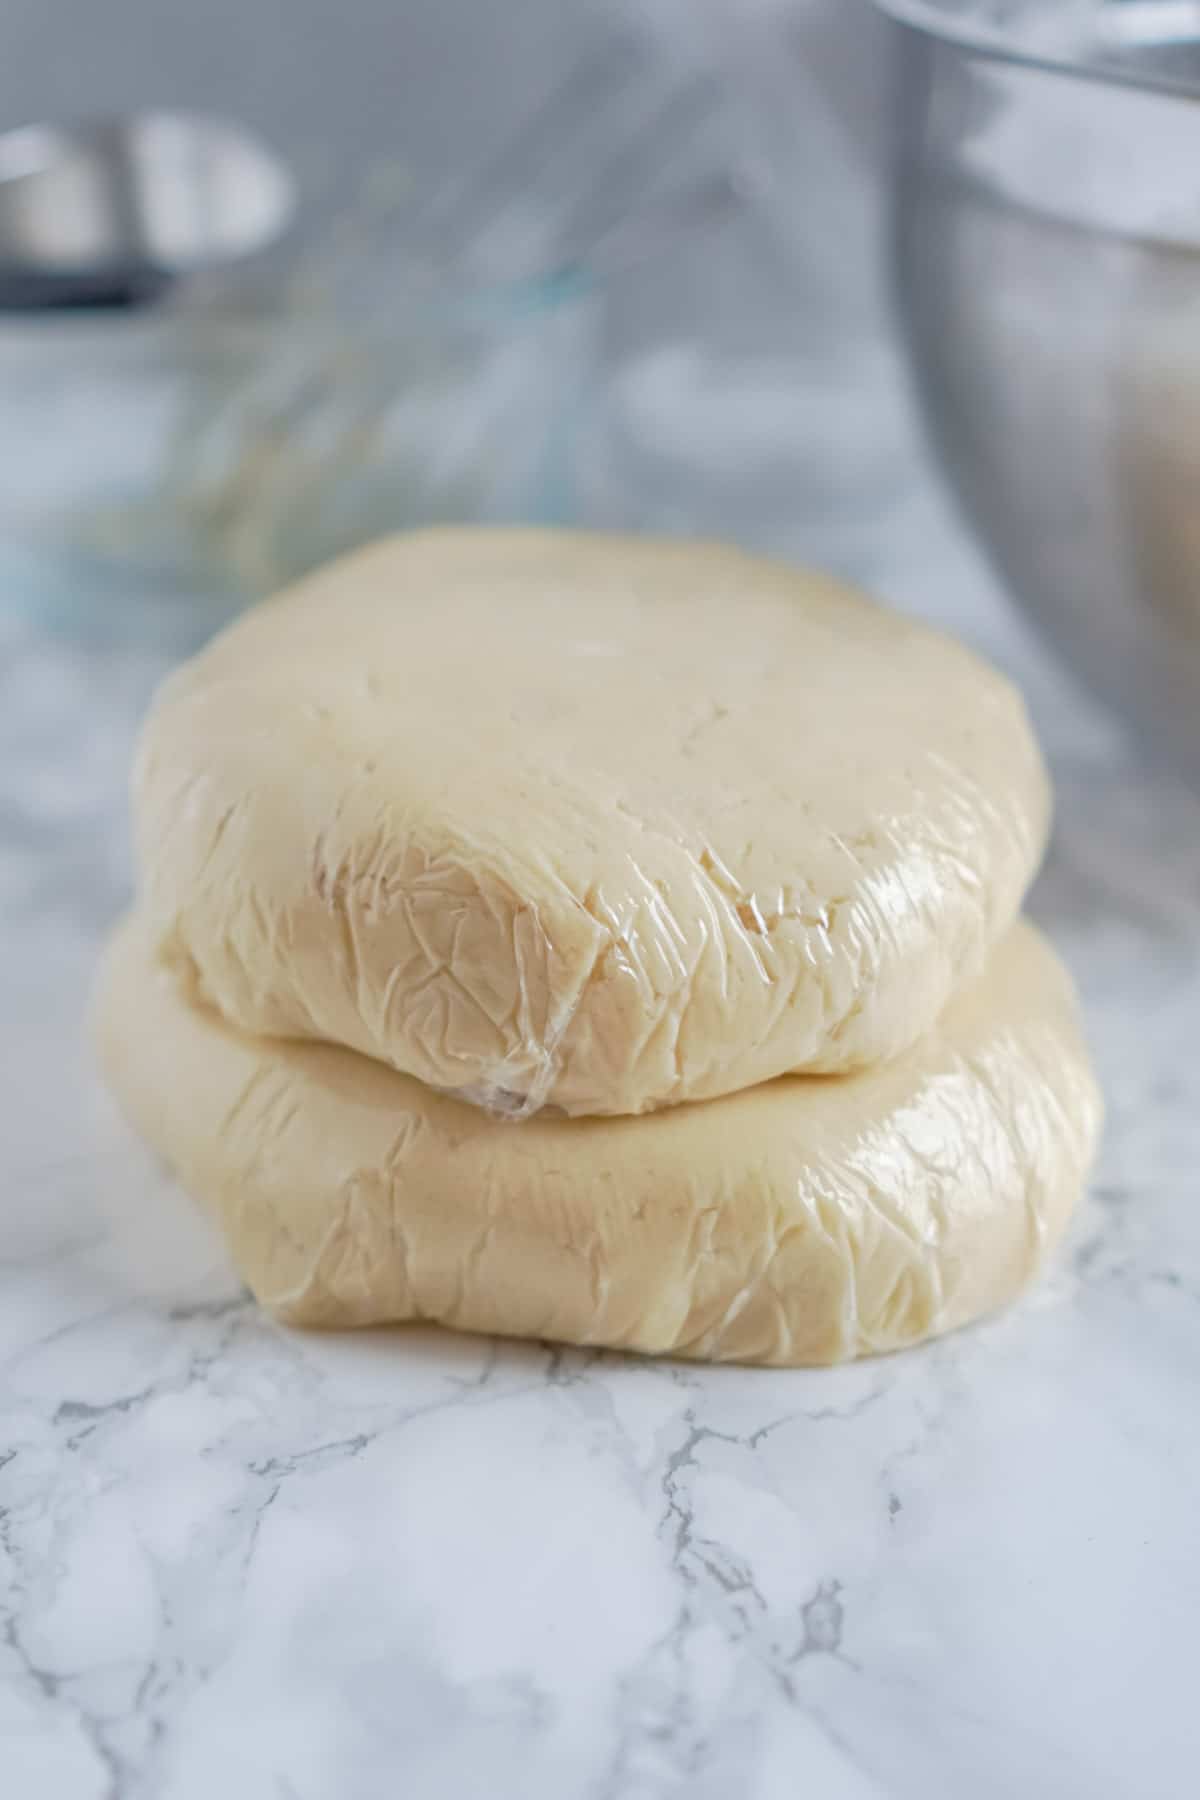 dough for sugar cookie bites wrapped in plastic wrap